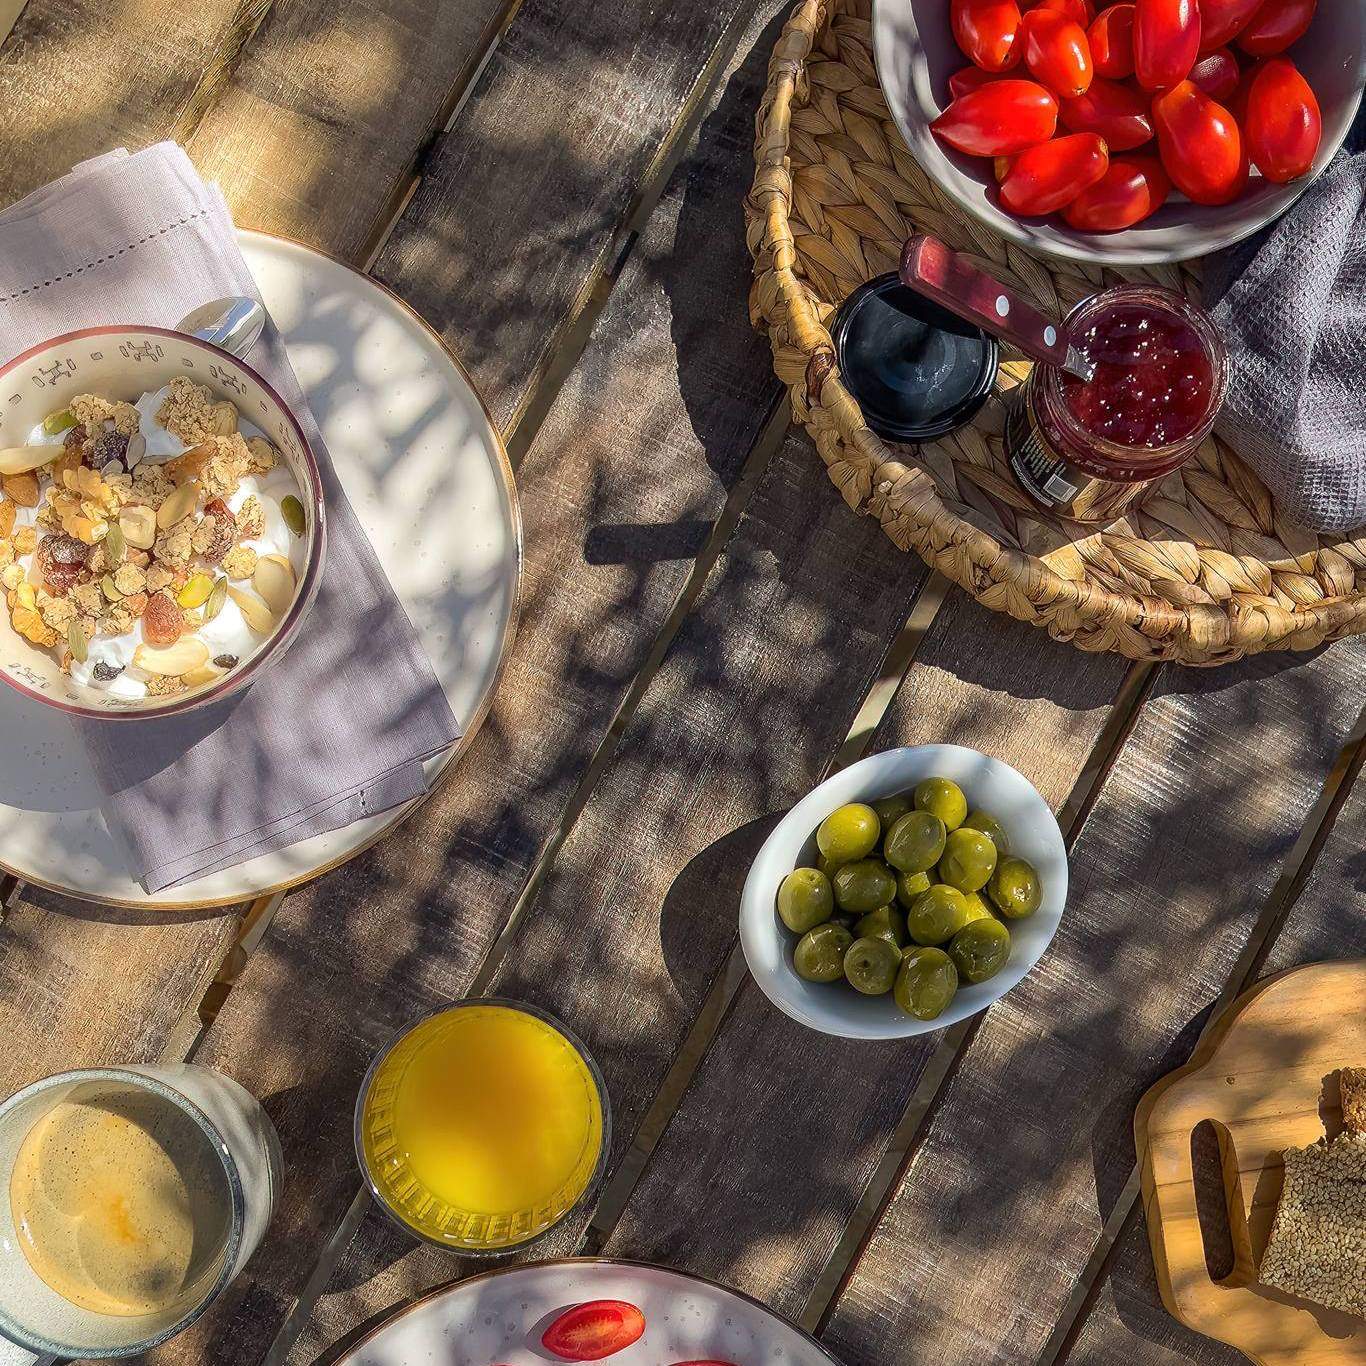 Indulge in the rich and vibrant flavors of Greece, a culinary journey you won't forget.
.
#AmalgamHomes #ArtOfComfort #GreekIslands #CycladesMagic #VisitGreece #DiscoverGreece #Paros #Naxos #Mykonos #Tinos